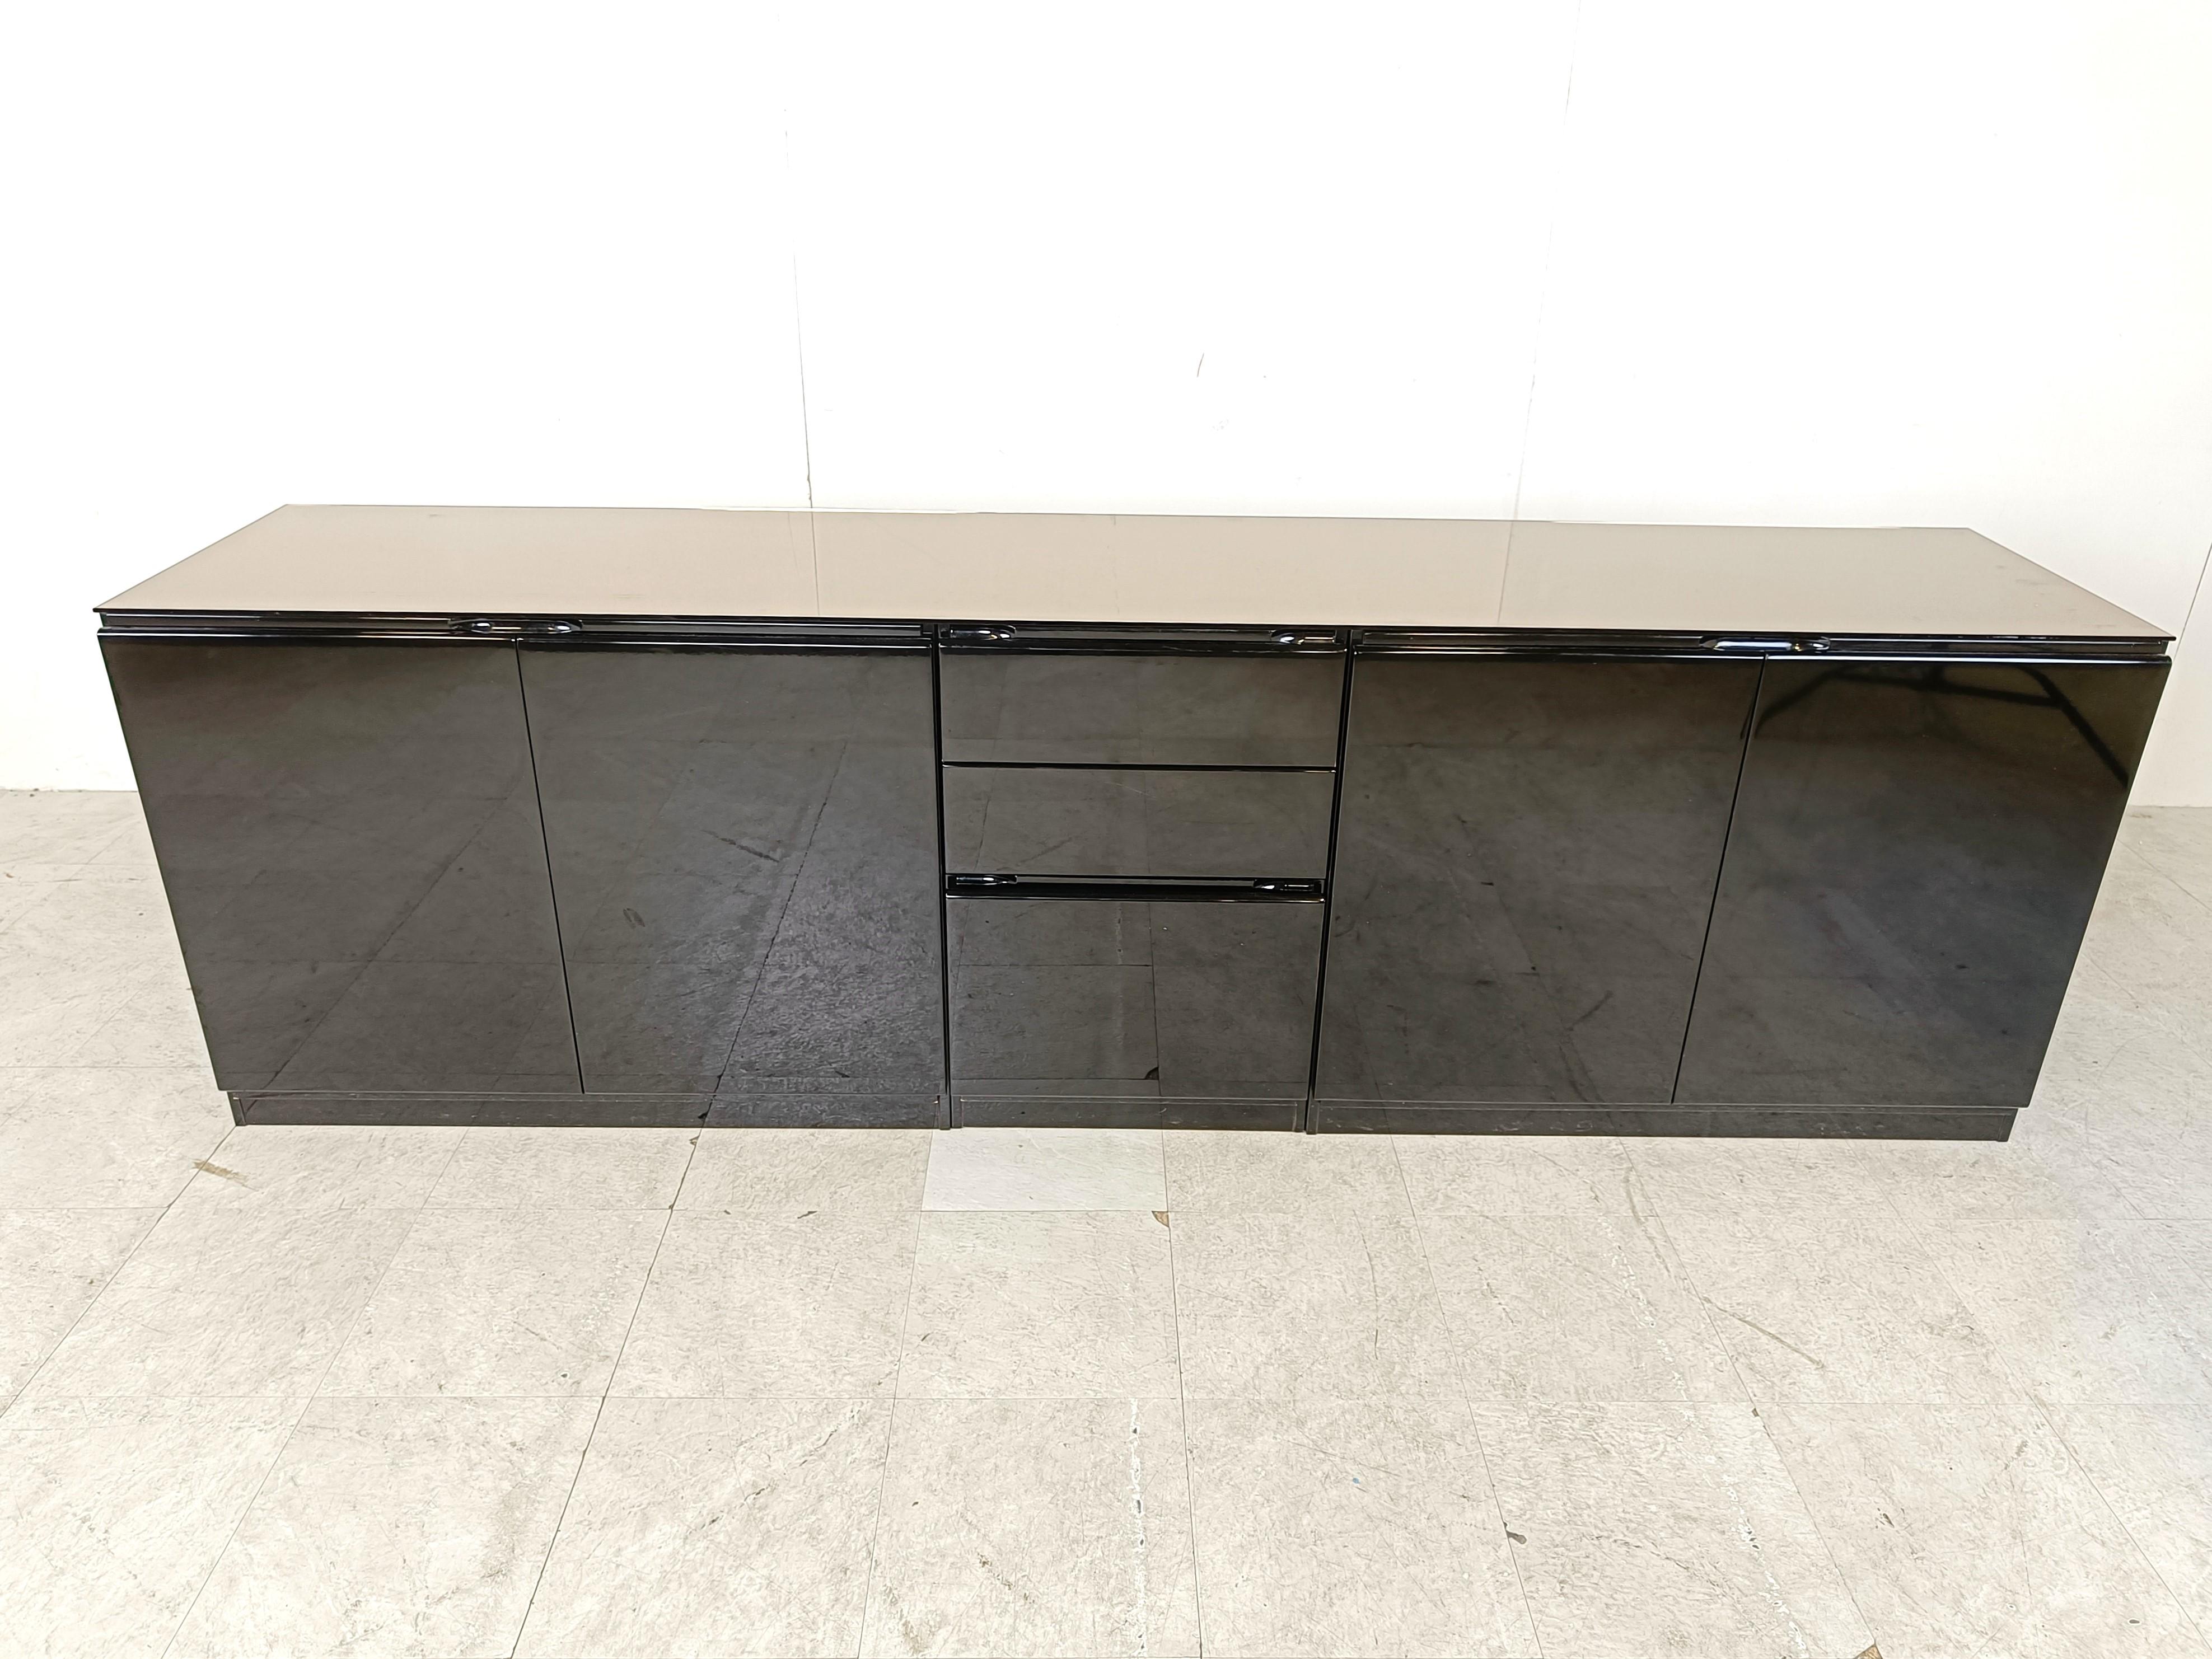 High gloss black lacquer credenza with 4 doors and 3 drawers.

High quality seventies sideboard with a timeless and minimalist design

The sideboad has a mirrored glass top

Good condition

1970s - Italy

Dimensions:
Lenght: 235cm/92.51